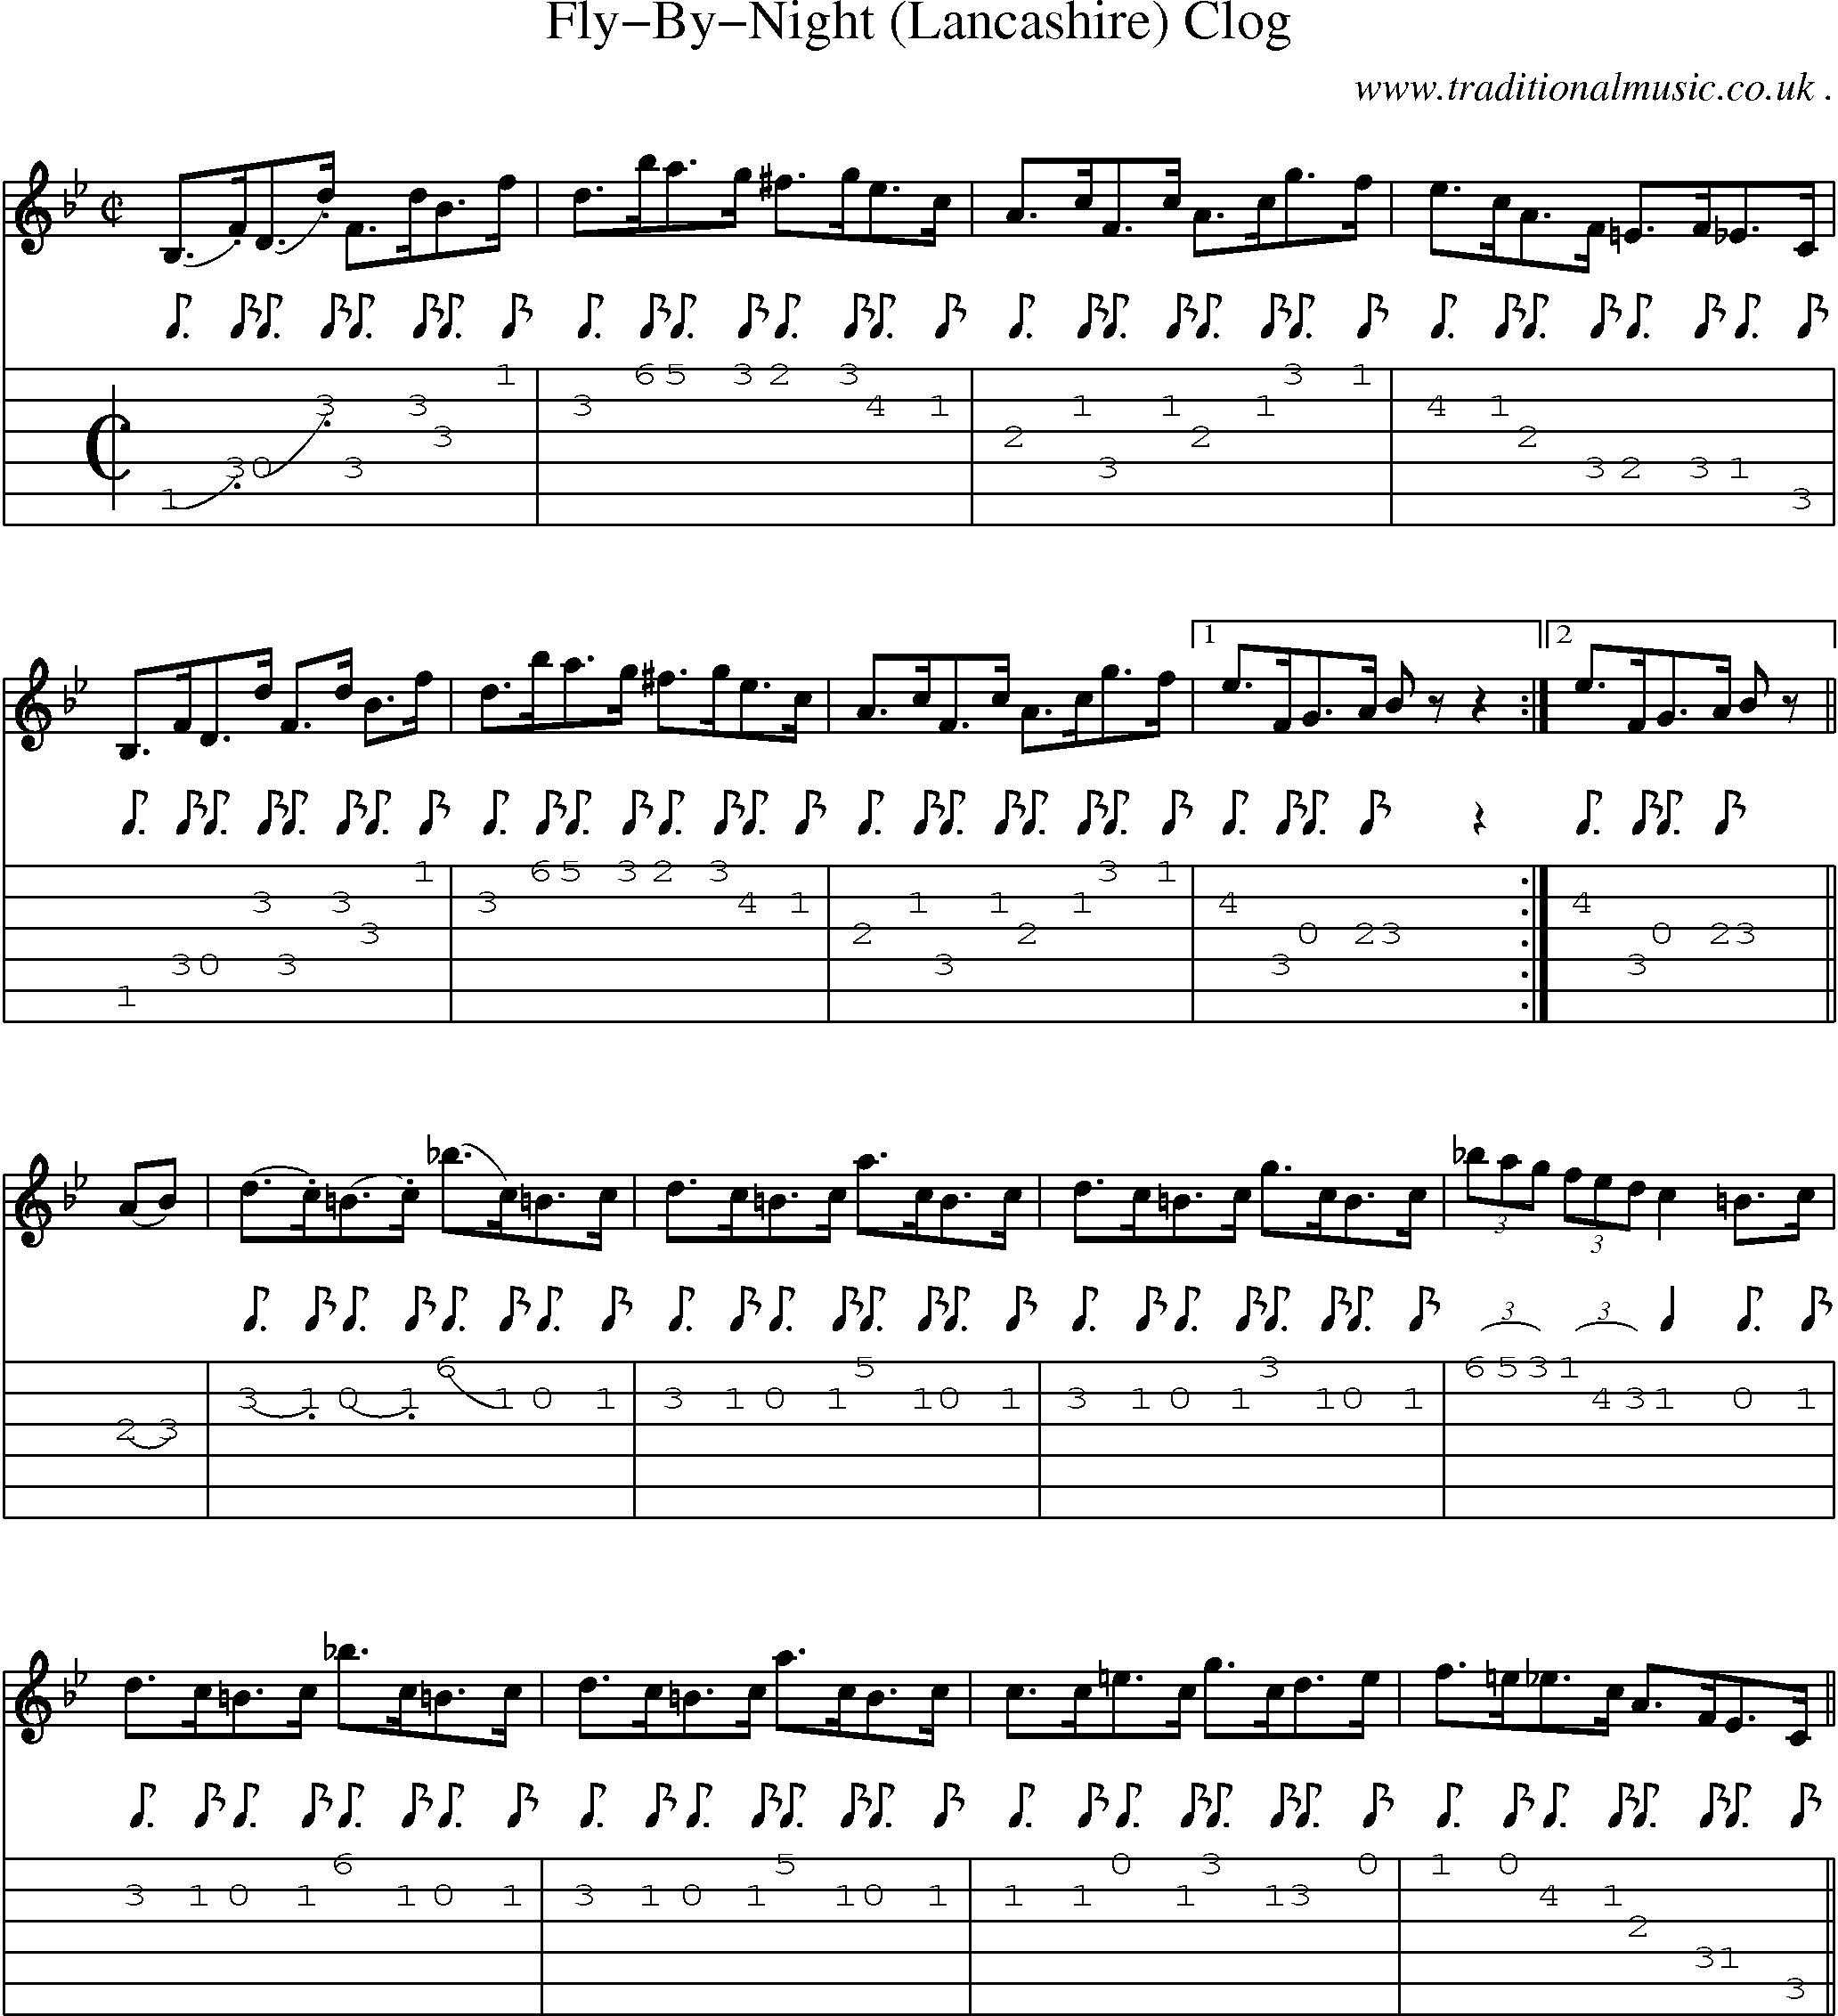 Sheet-Music and Guitar Tabs for Fly-by-night (lancashire) Clog